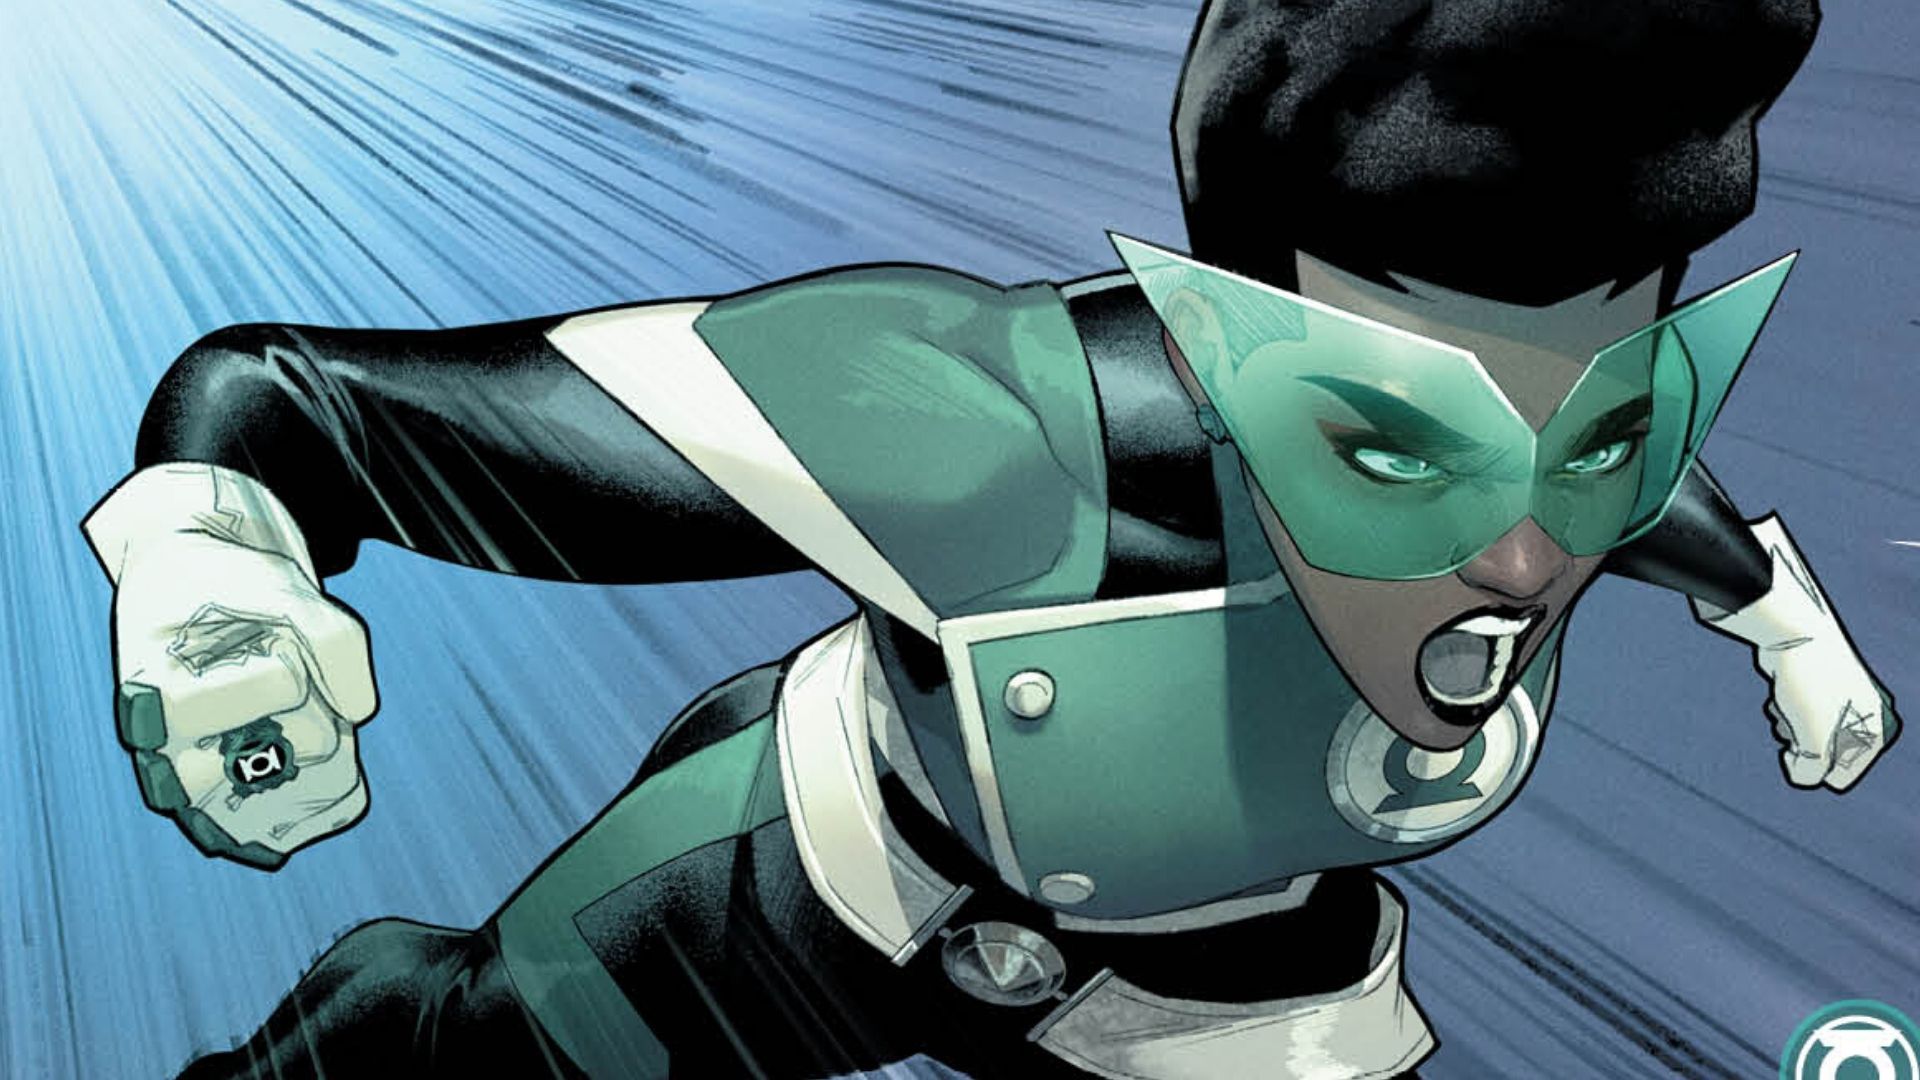 EXCLUSIVE: Preview of Issue 2 of N. K. Jemisin's Green Lantern